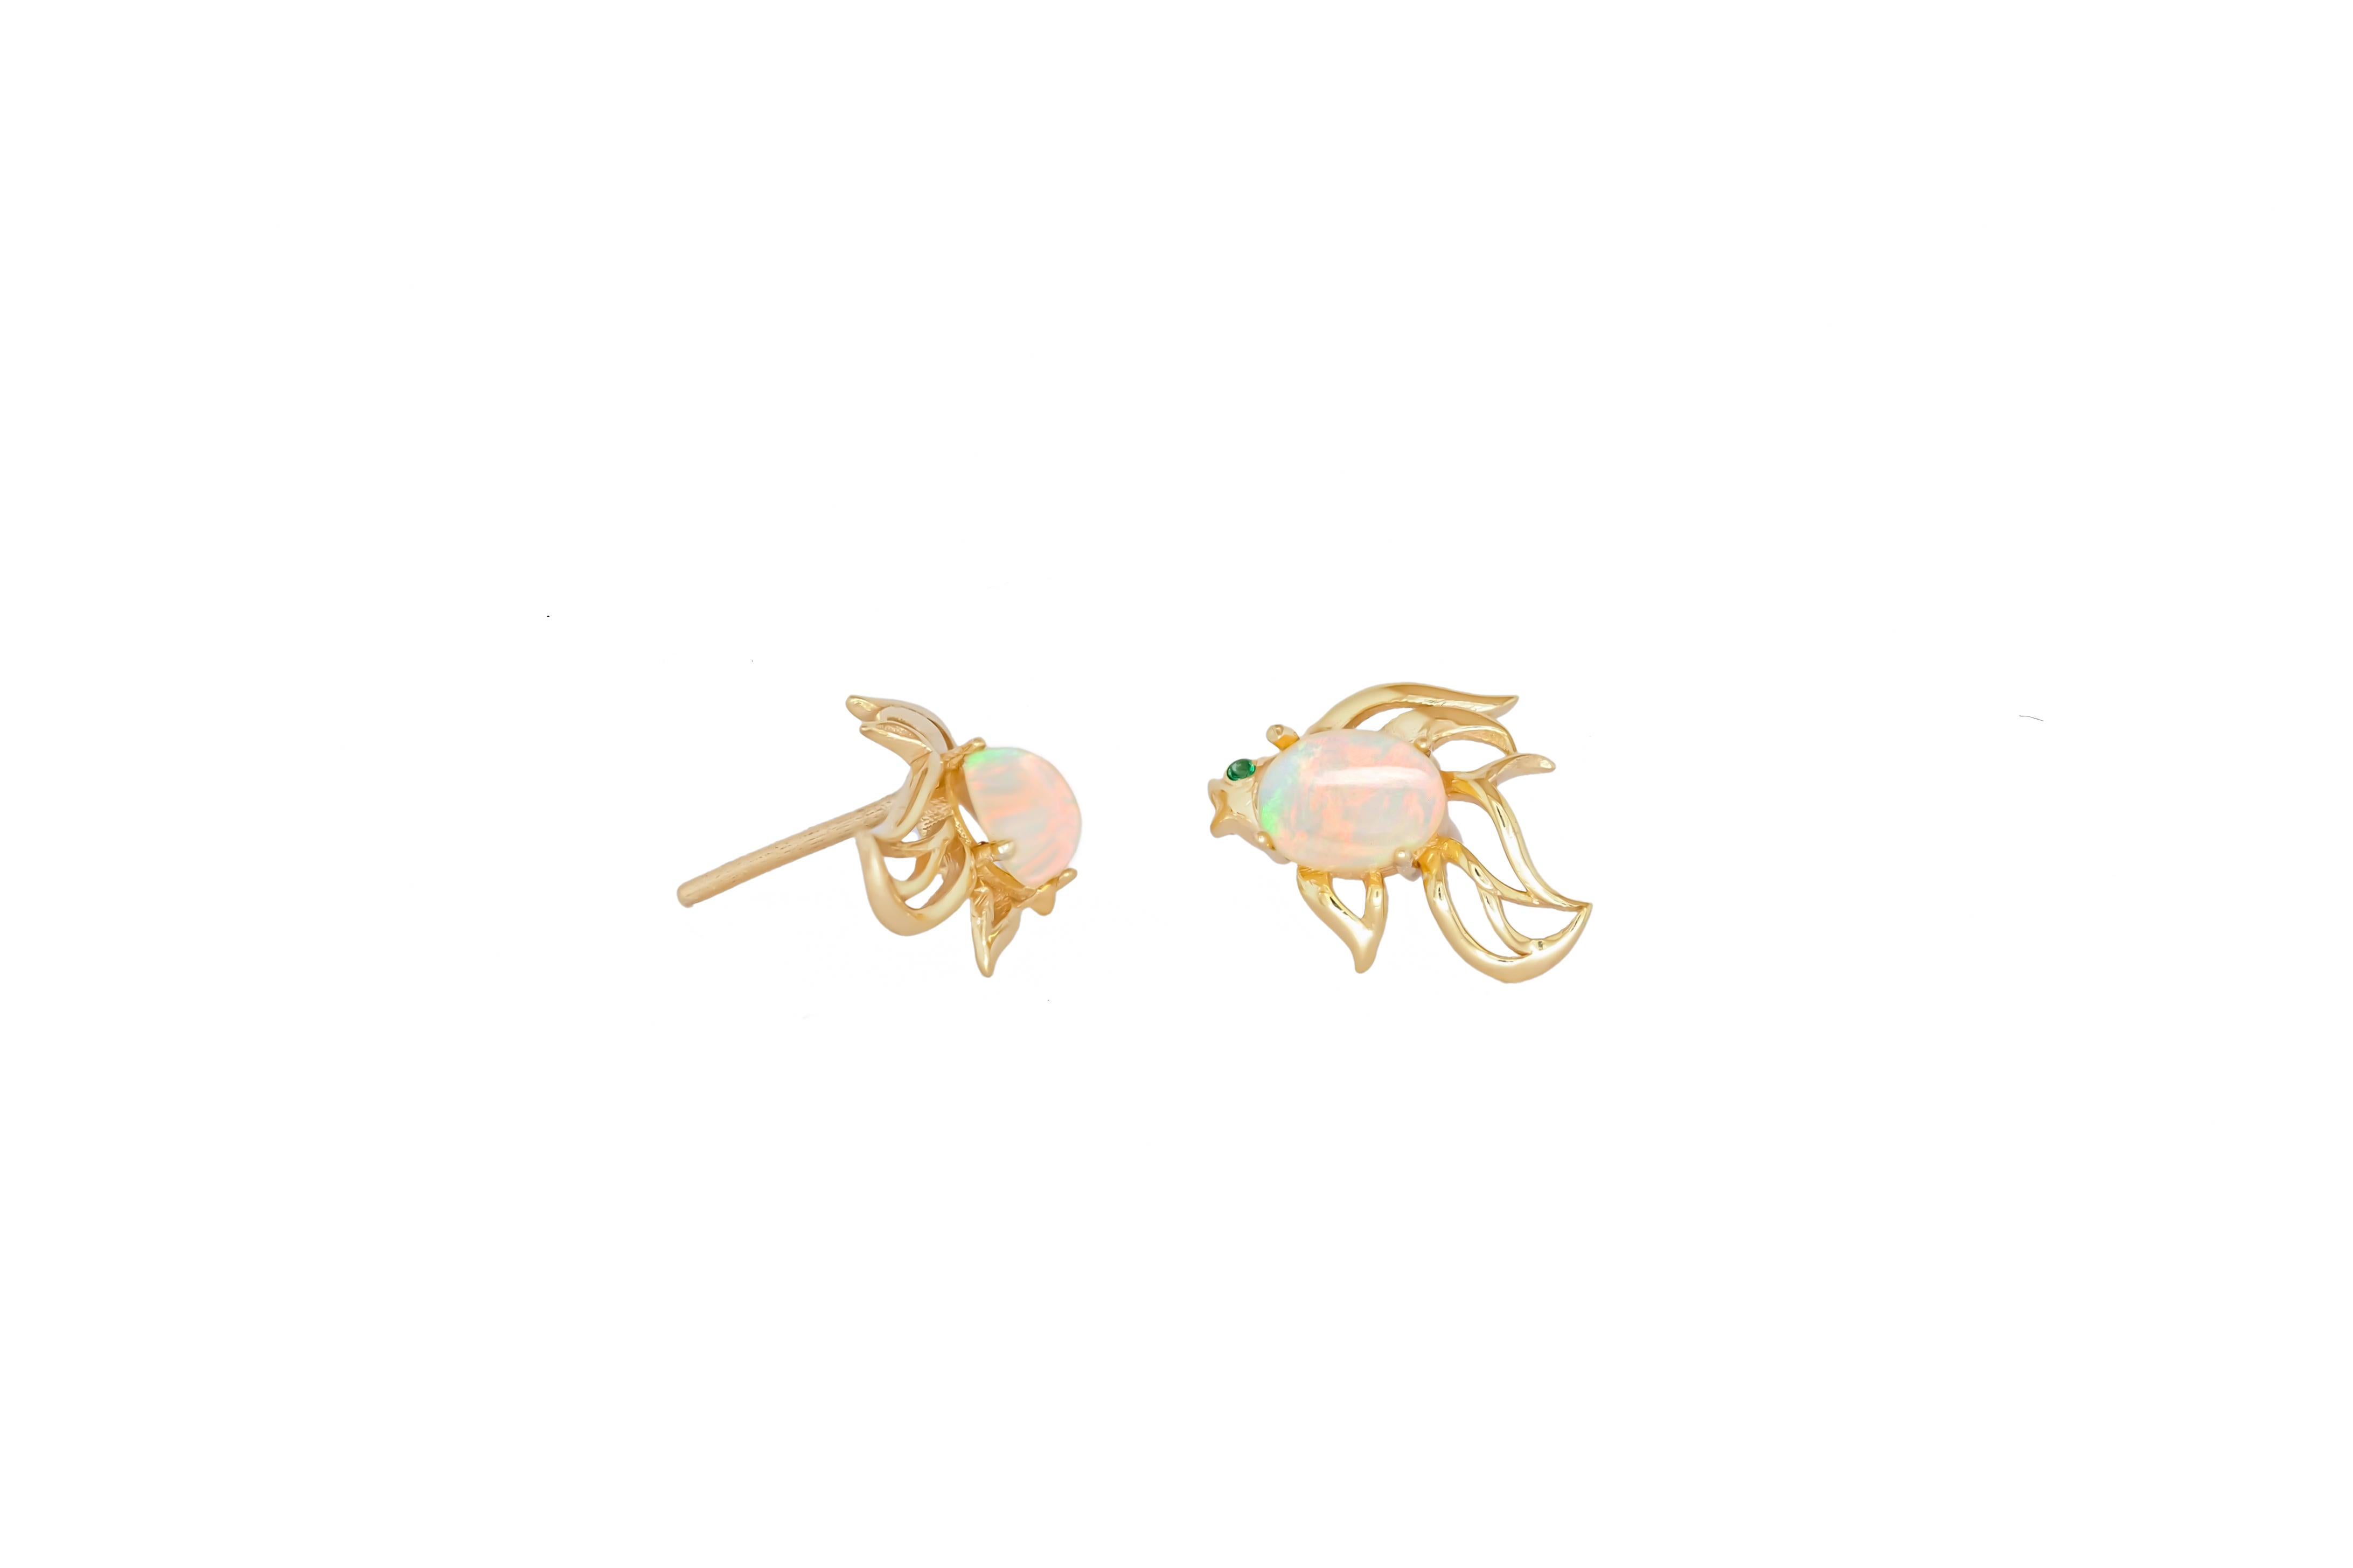 3 pair of earrings studs:  Fish, crab and flower  1